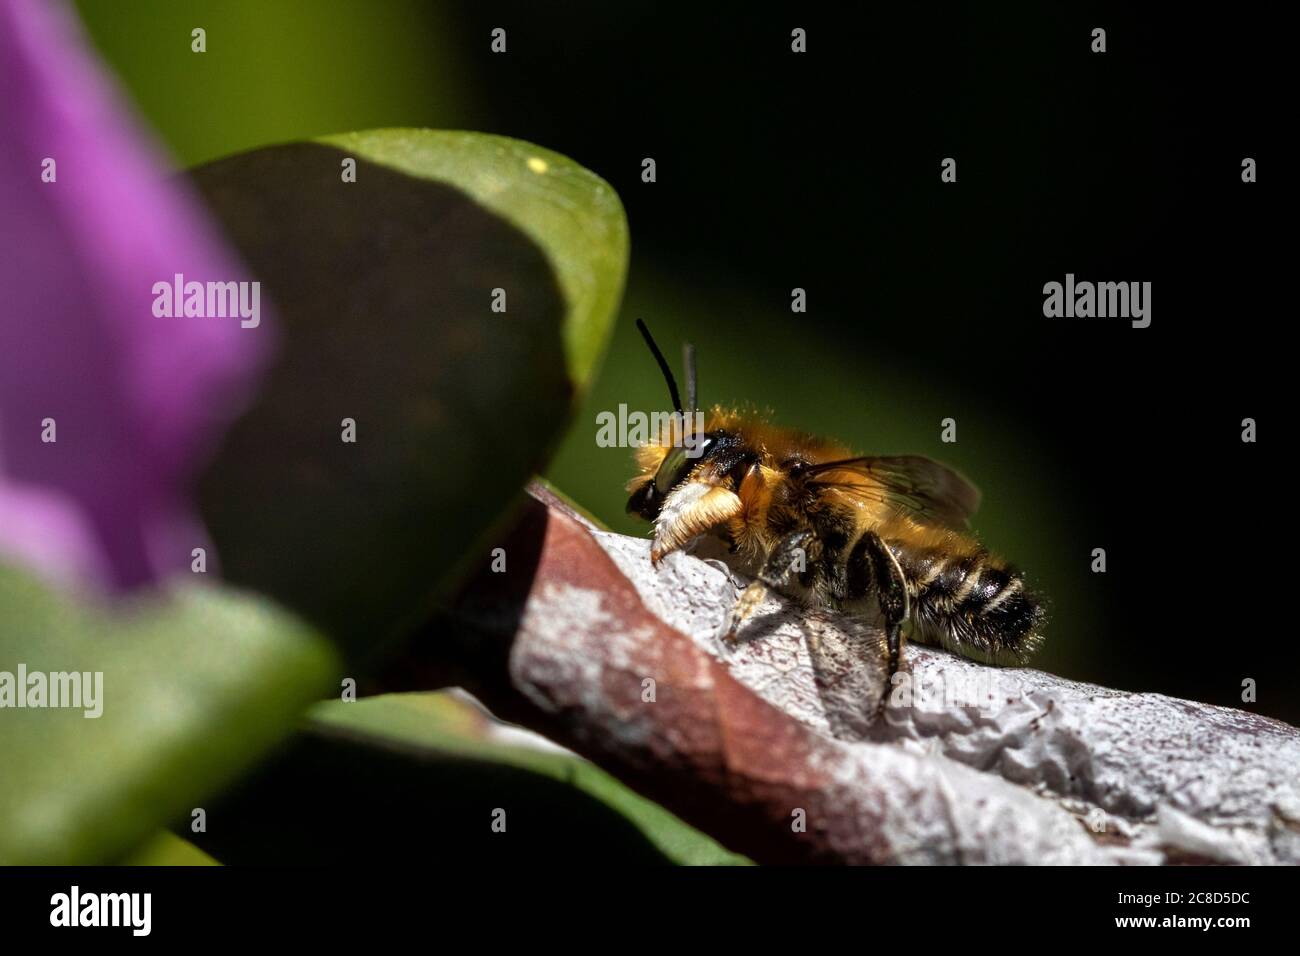 A macro portrait of a leefcuttre bee sitting on a branch of a plant. The insect is also called a megachile willughbiella. Stock Photo